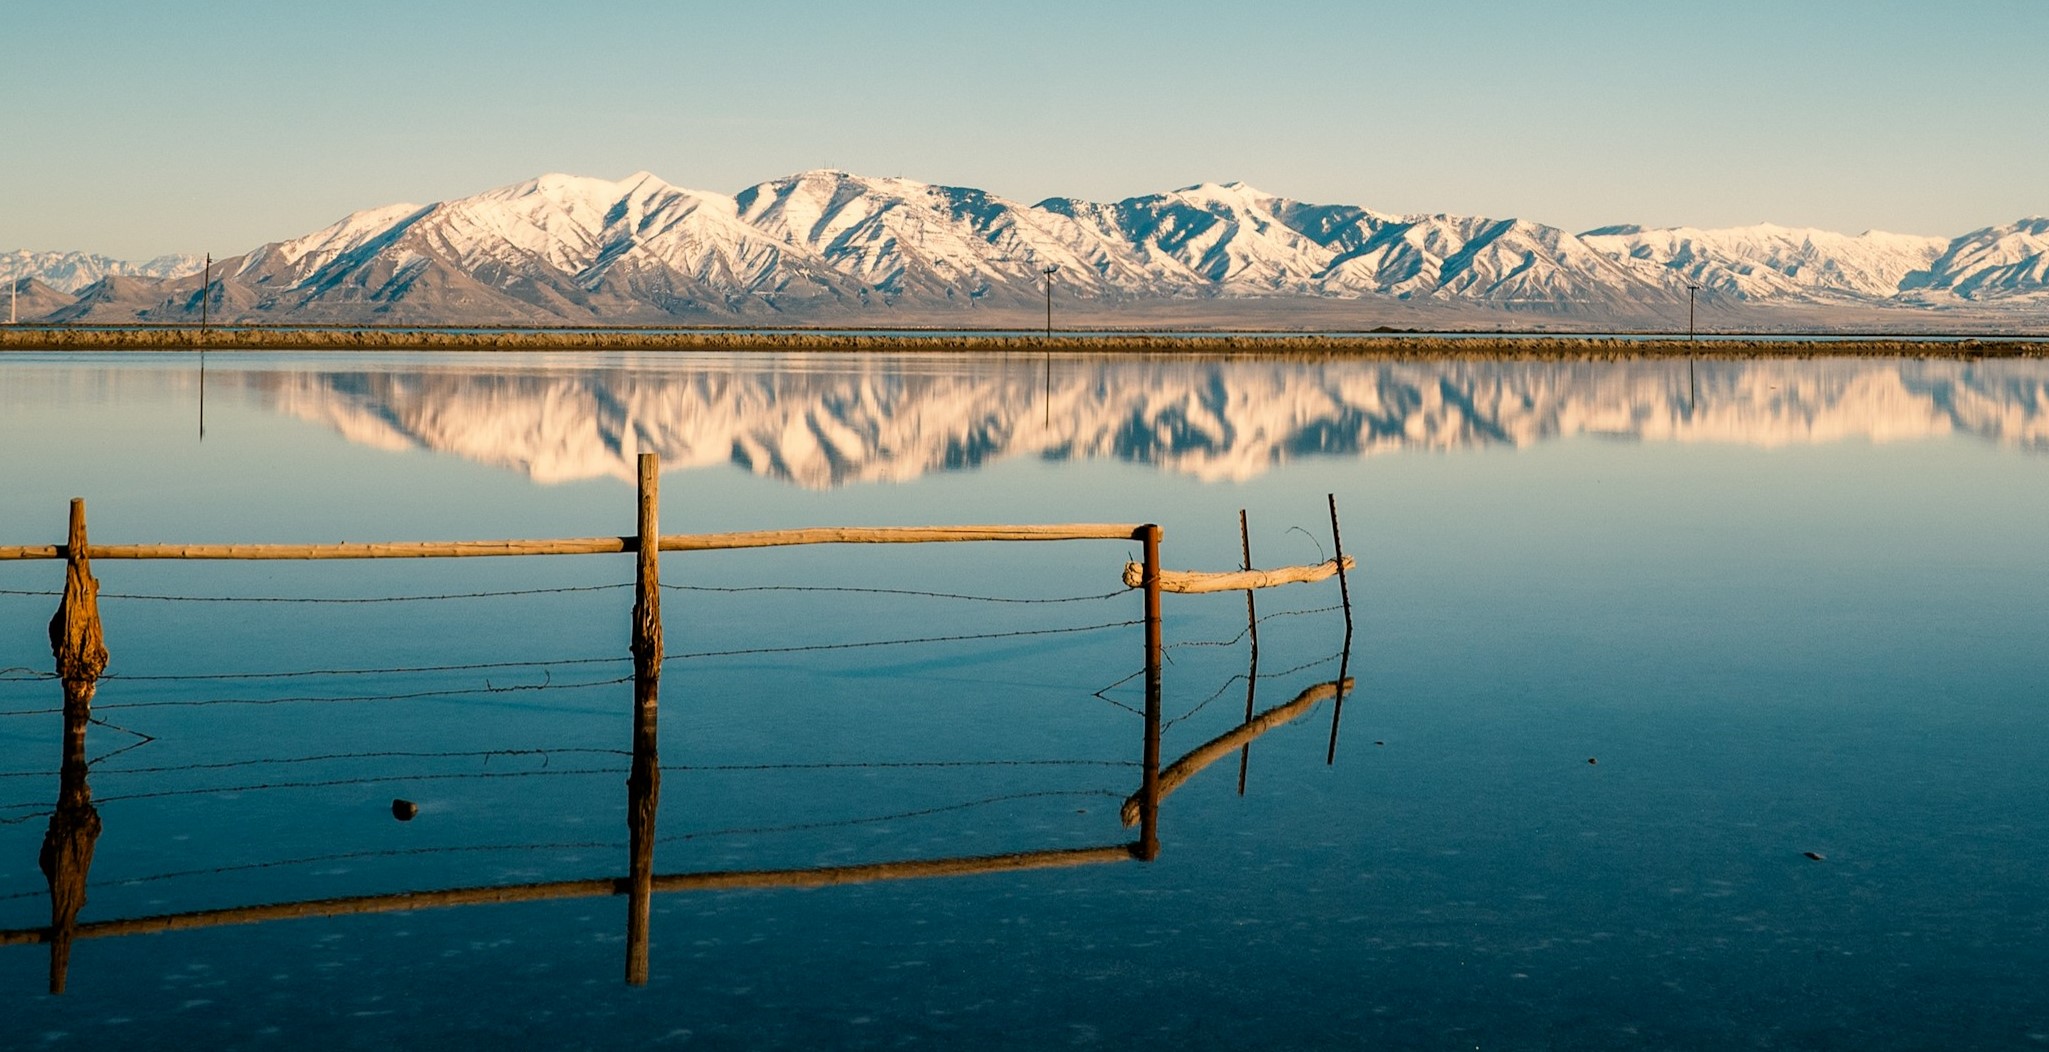 A small wooden fence in a vast lake with mountains in the background.